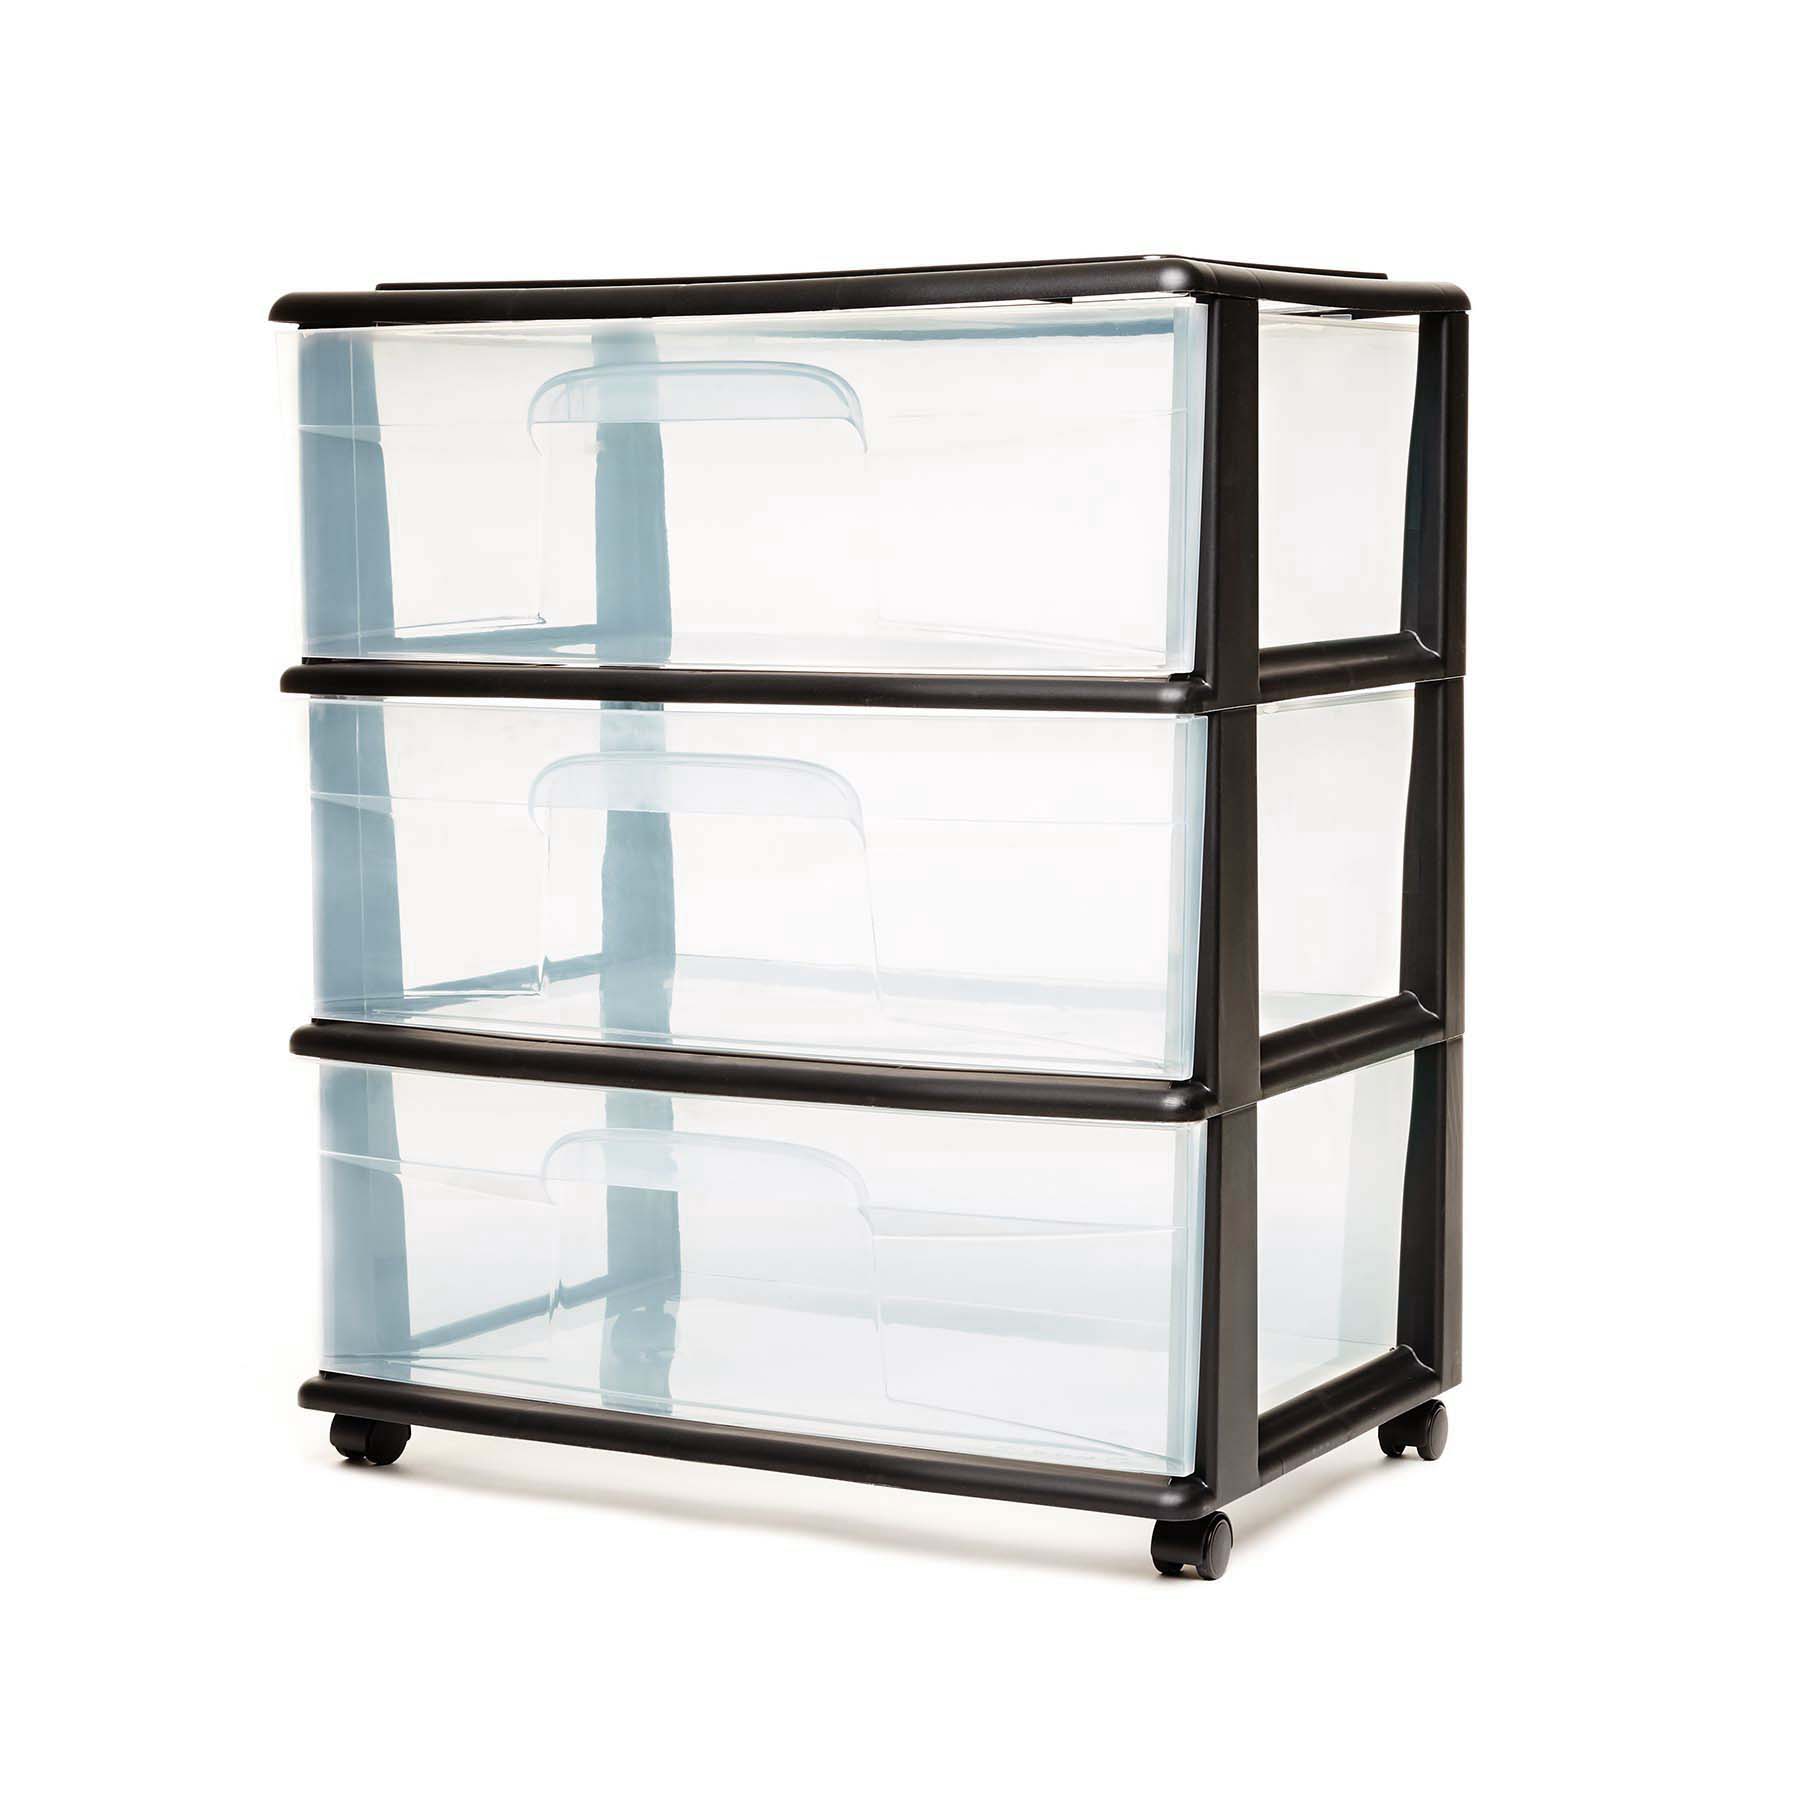 Homz 3 Drawer Wide Cart - image 1 of 5